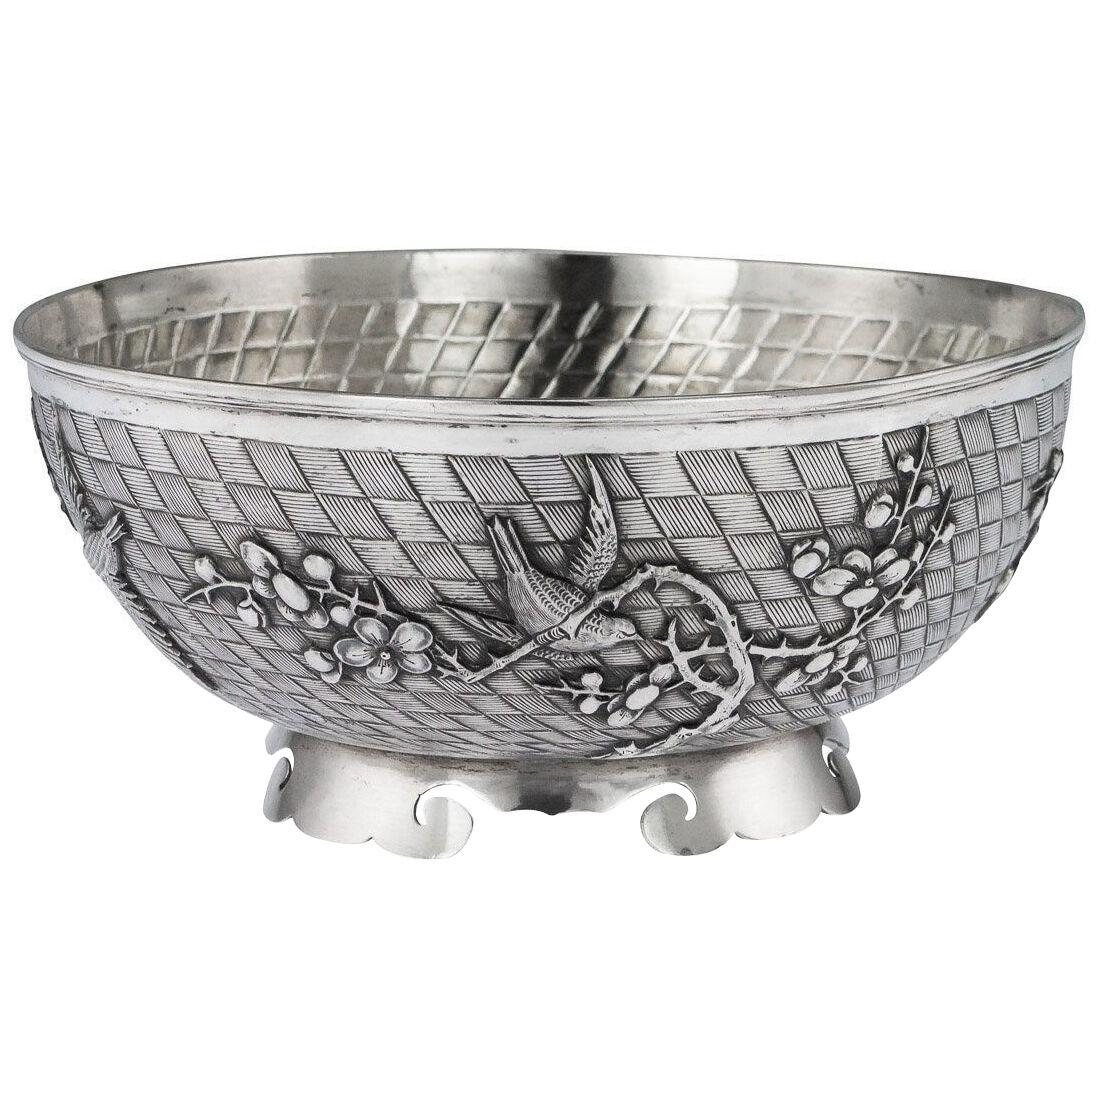 20thC Chinese Export Solid Silver Bowl, Singfat c.1900